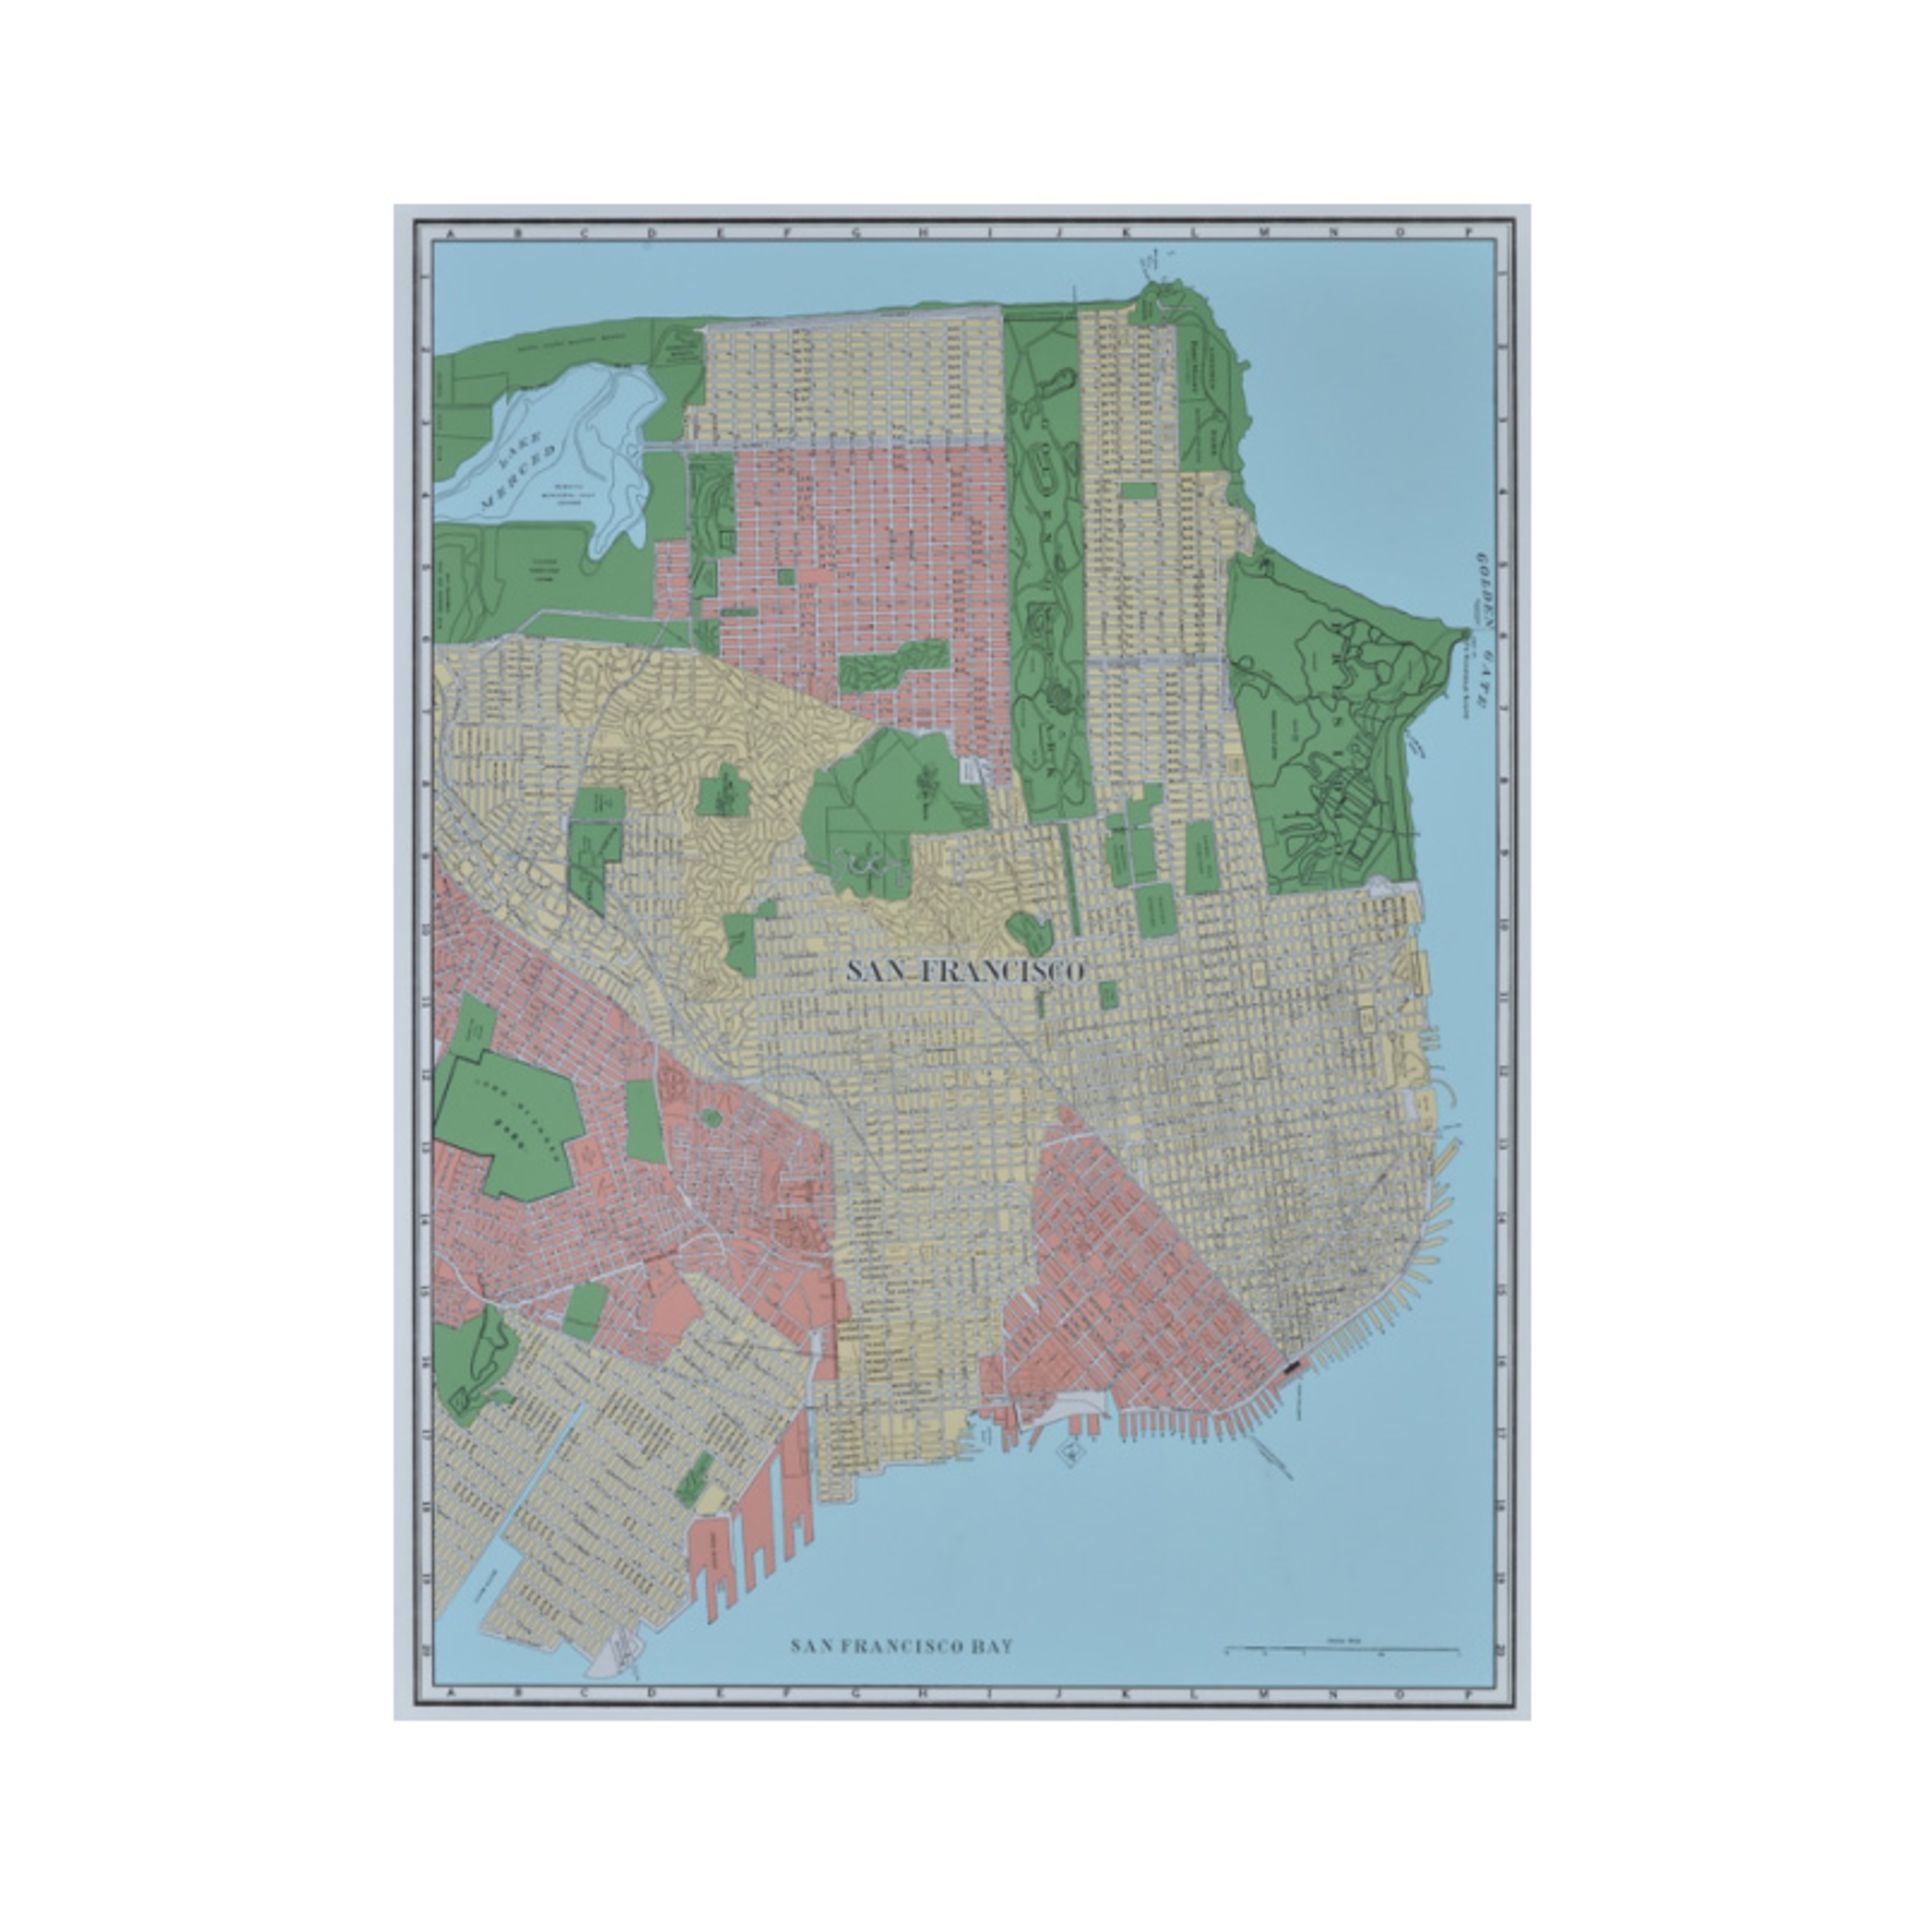 Capital Map San Francisco These Unframed City Maps Pay Homage To Each City’s History And The Life